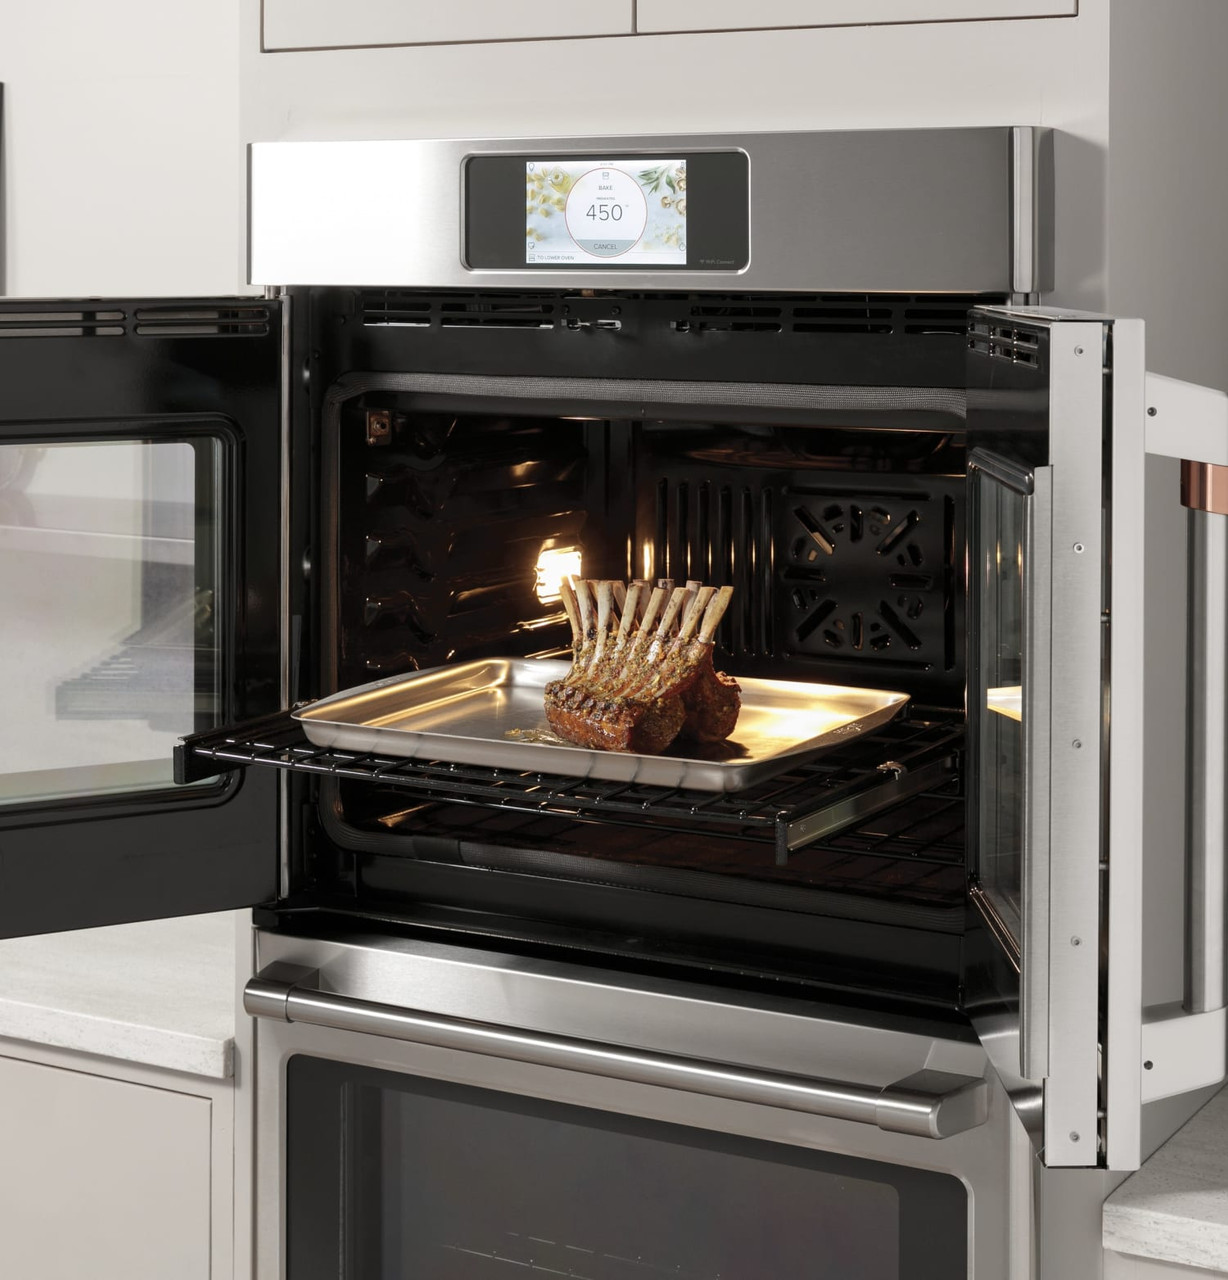 Café - Professional Series 30” Built-In Double Electric Convection Wall Oven - Stainless steel - CTD90FP2NS1